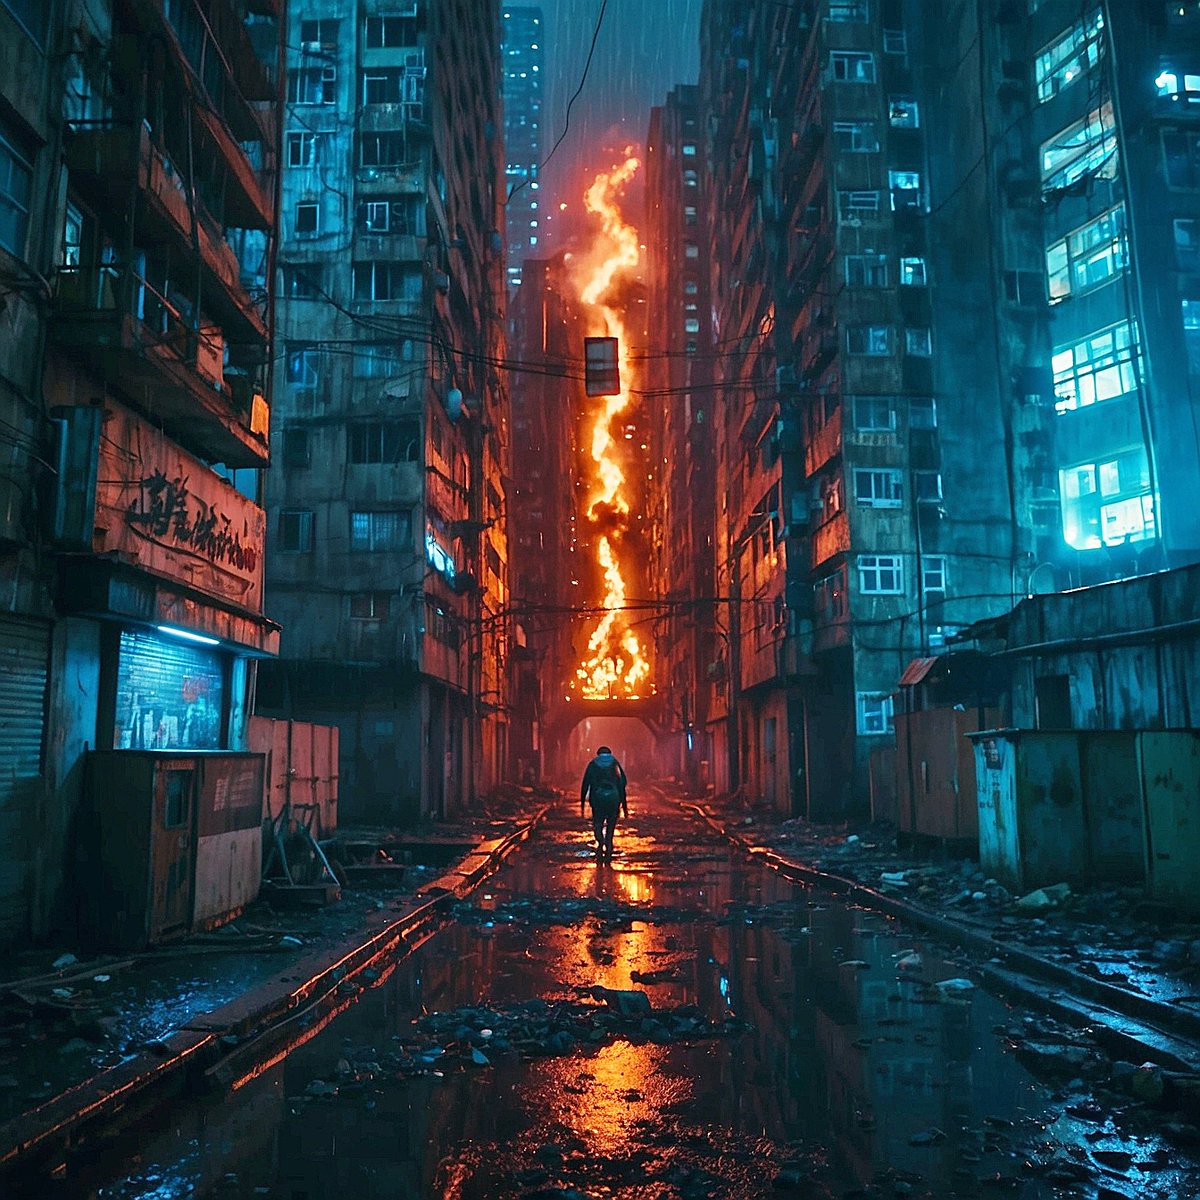 In the heart of the neon-lit Cyberpunk Metropolis, a towering structure succumbs to flames, casting flickering shadows over the chaotic streets, a symbol of decay in the unforgiving urban sprawl!! 🔥 #nftpix #digitalartists #aiartistcommuity #cyberpunk